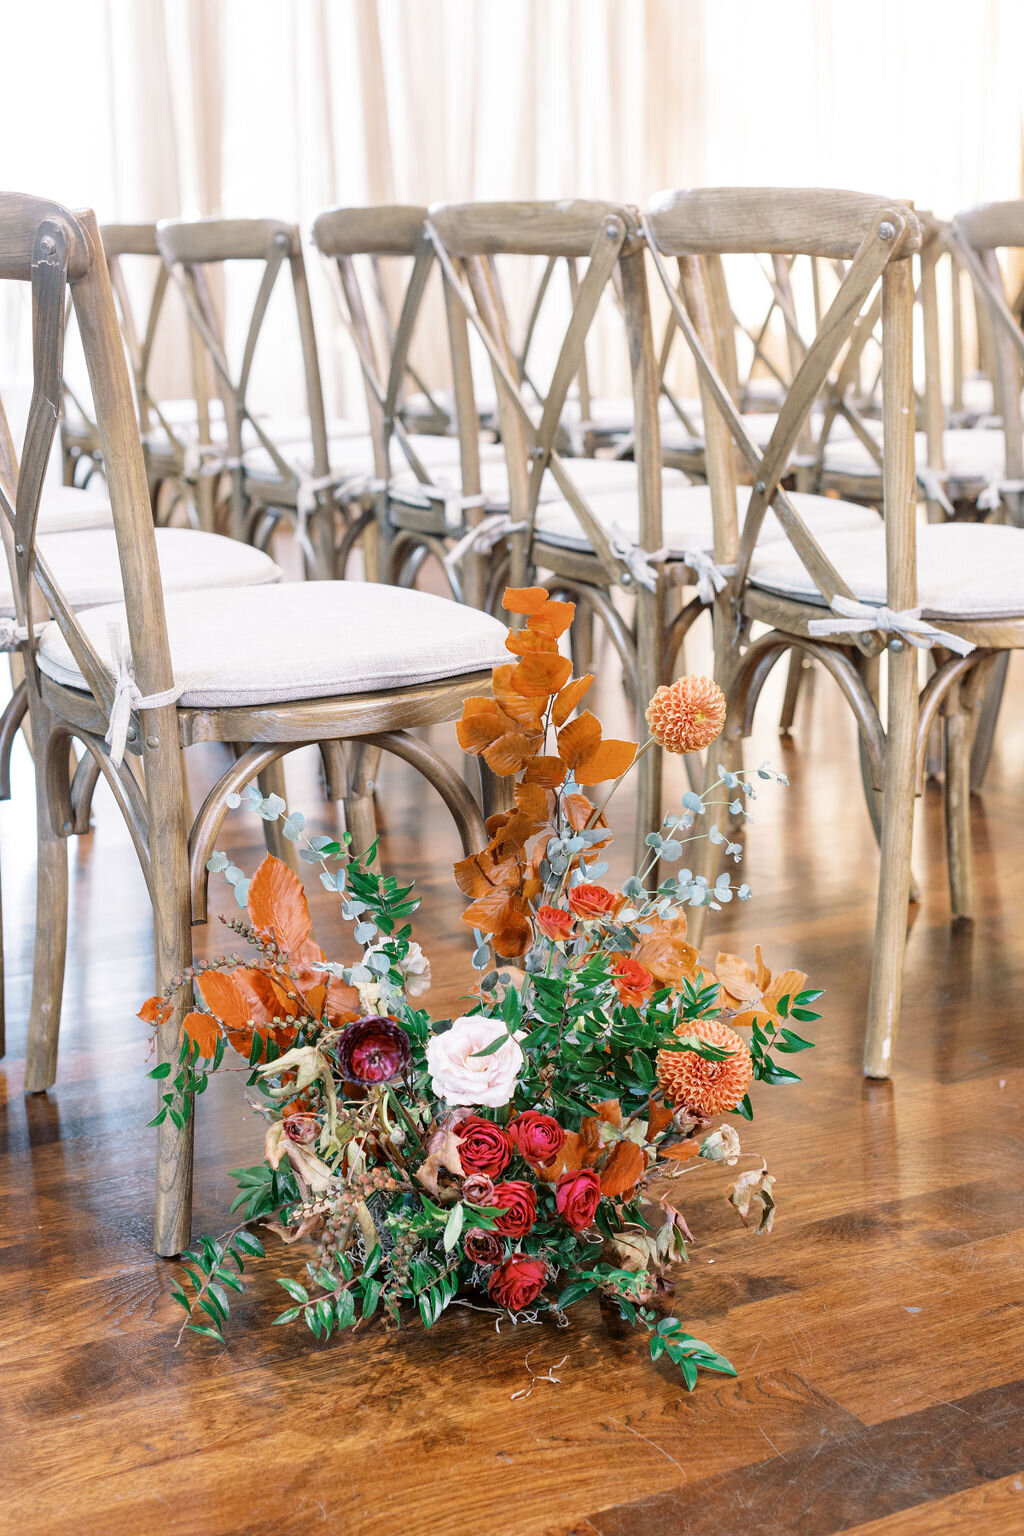 Organic ceremony aisle markers accompanied the installations with pops of burgundy, burnt orange, terra cotta, cream and fall foliage. Florals include garden roses, ranunculus, and dahlias. Floral Design by Rosemary and Finch in Nashville, TN.